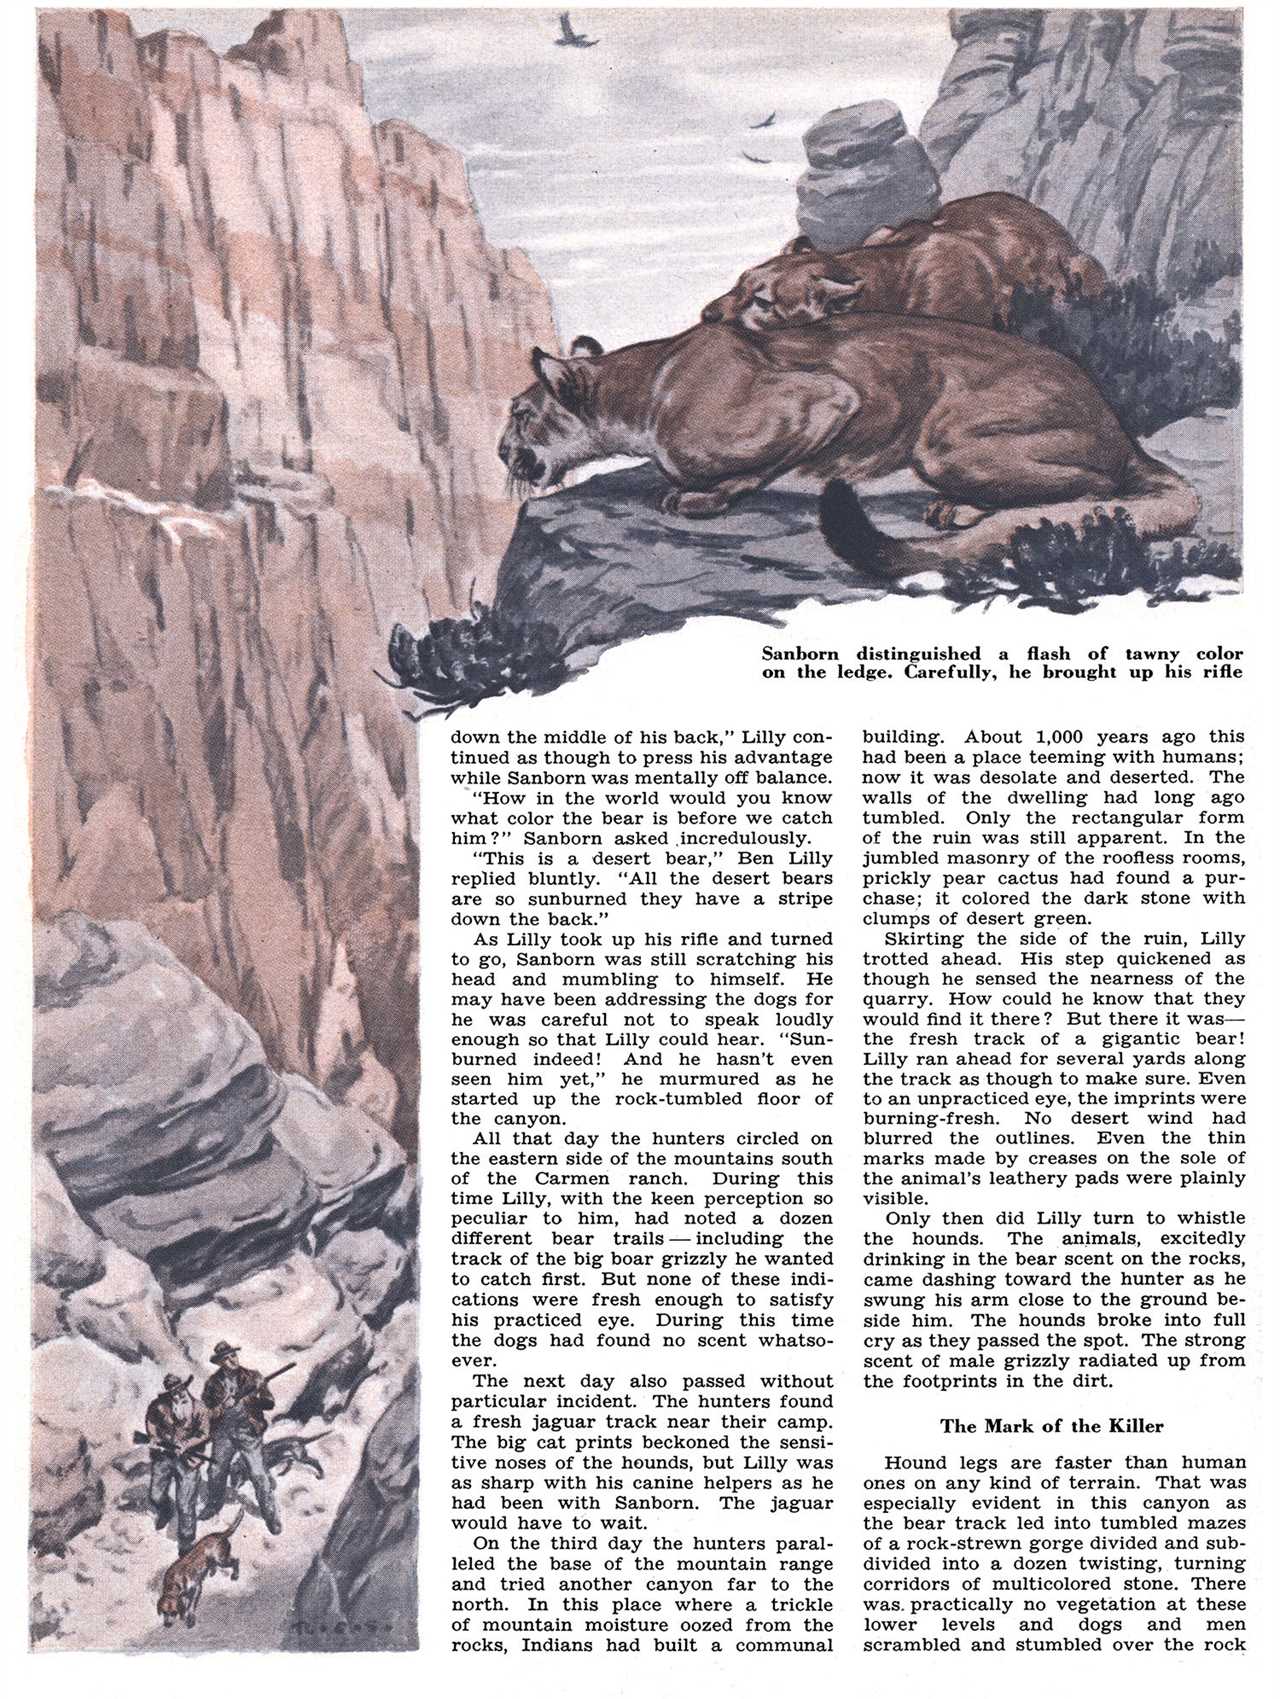 old magazine page showing cougar looking down at hunters and dogs from cliff